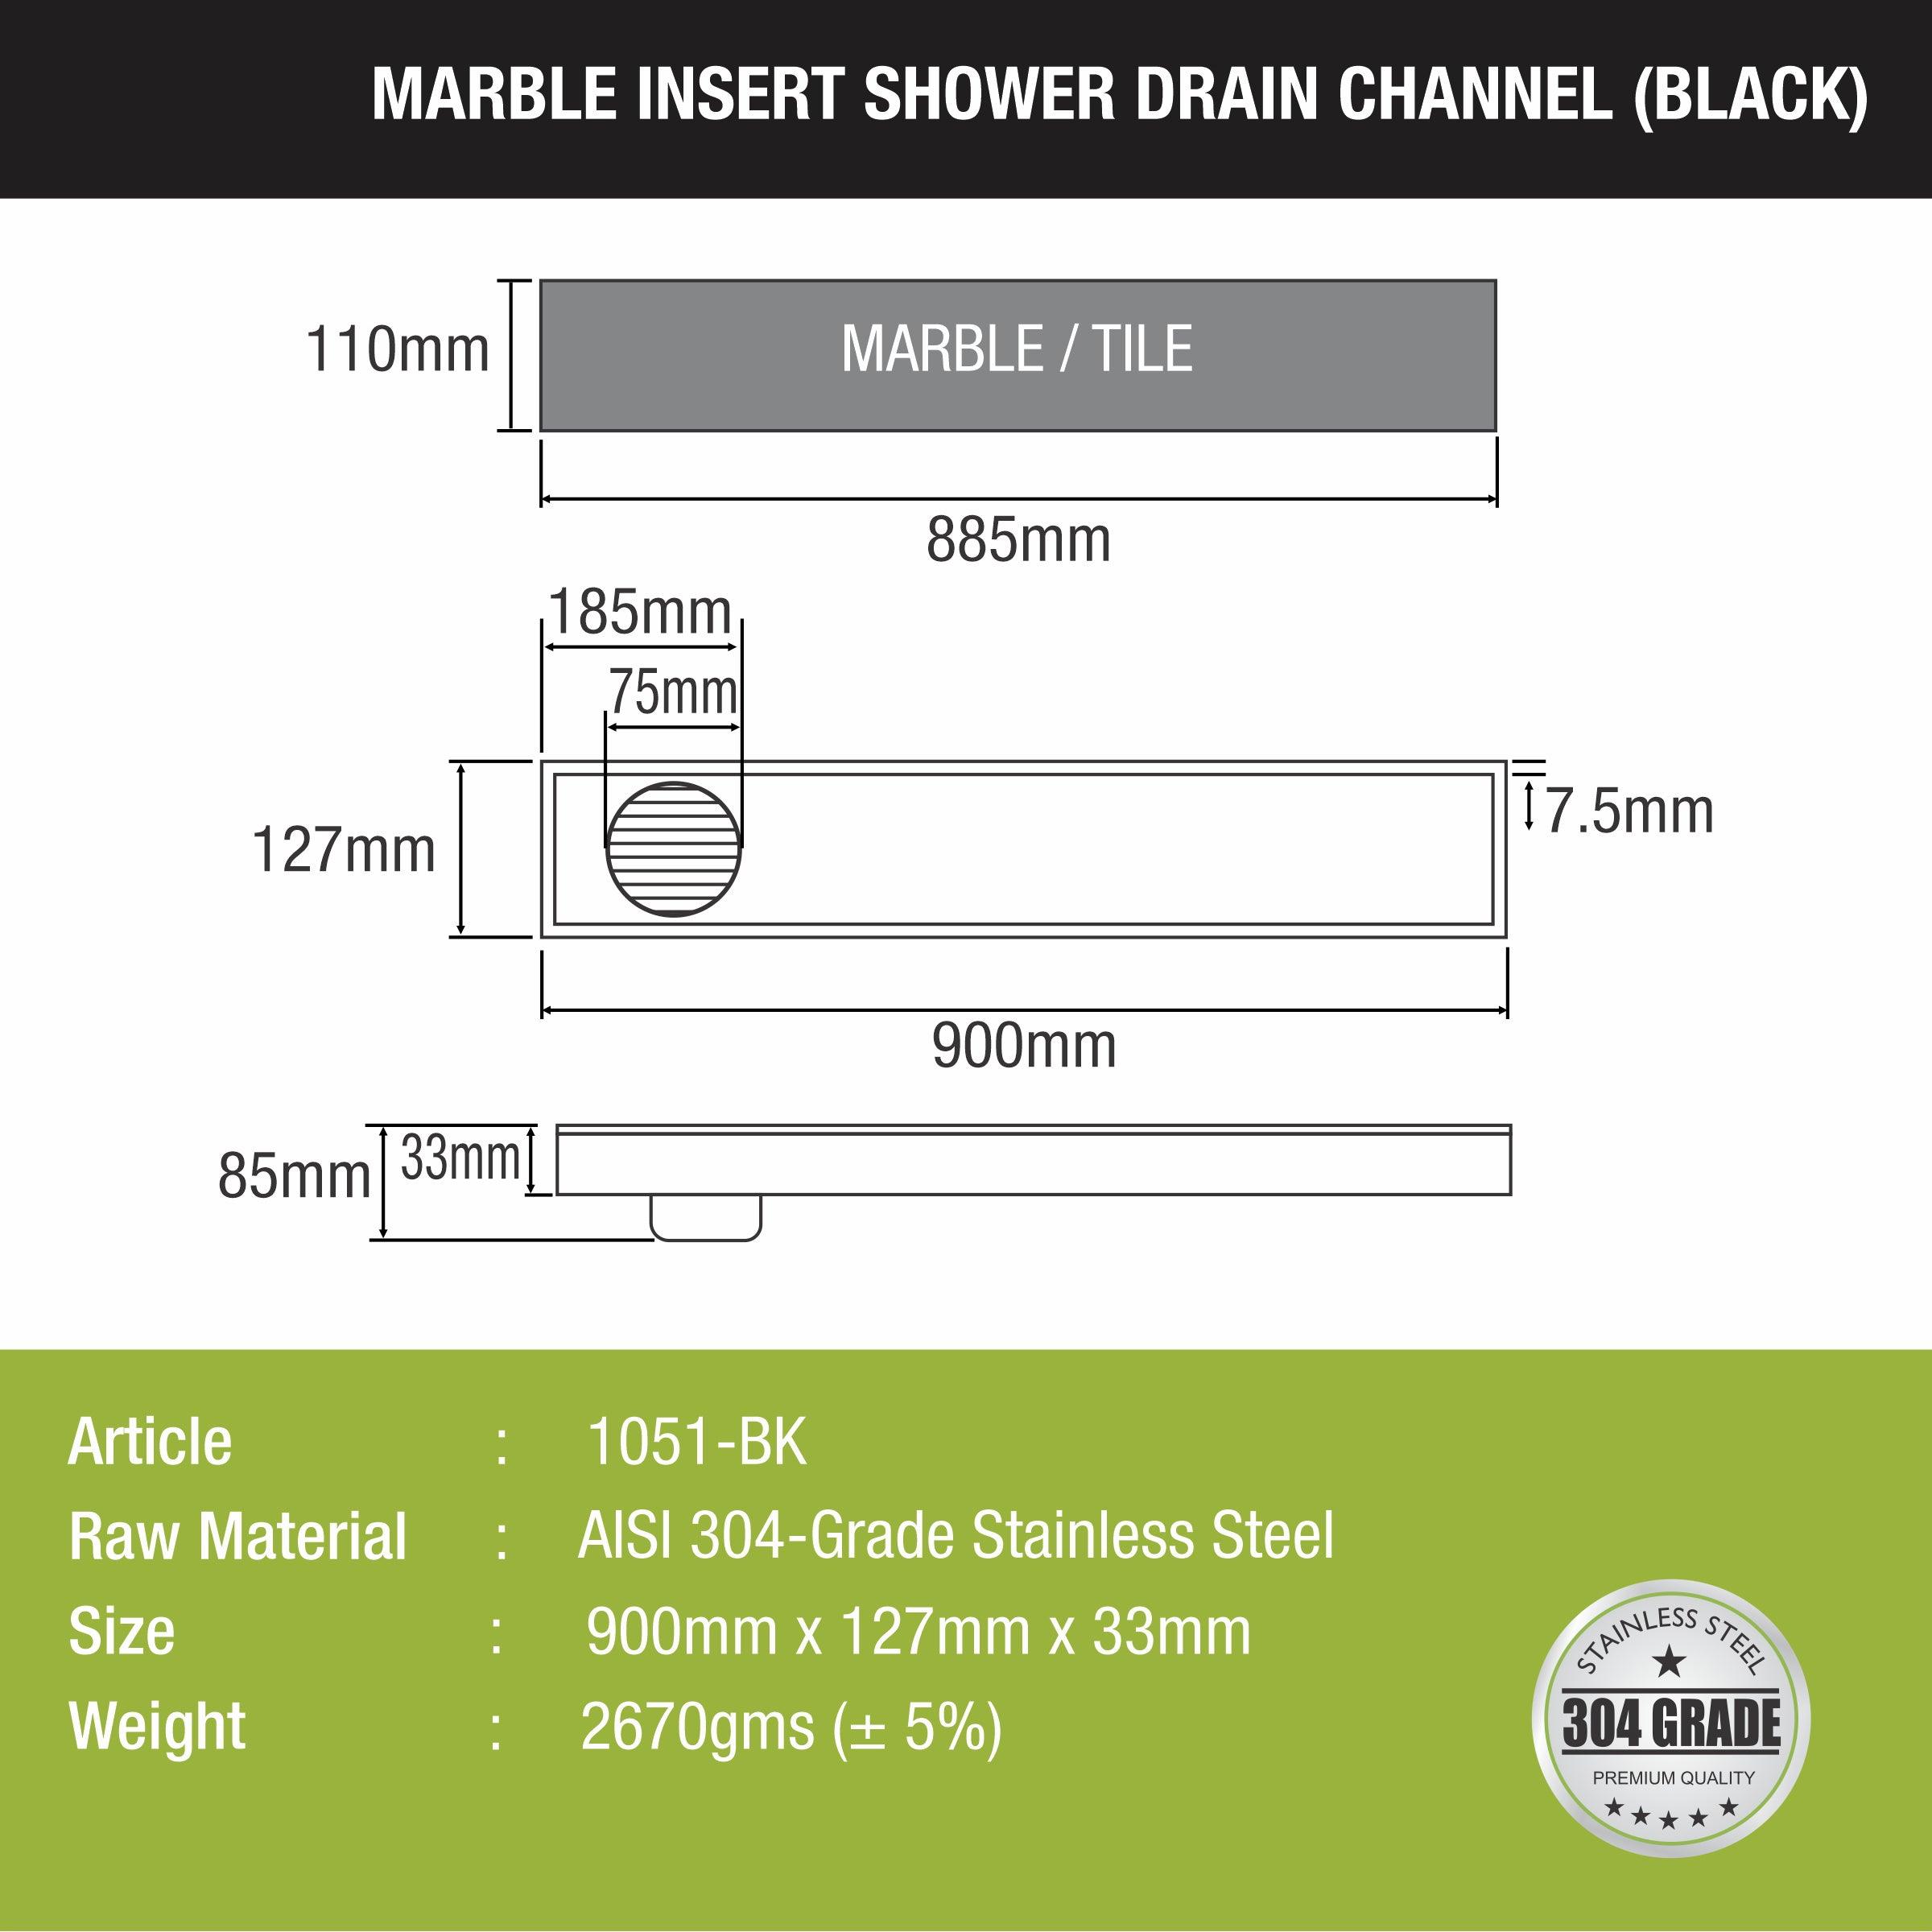 Marble Insert Shower Drain Channel - Black (36 x 5 Inches) size and measurement 